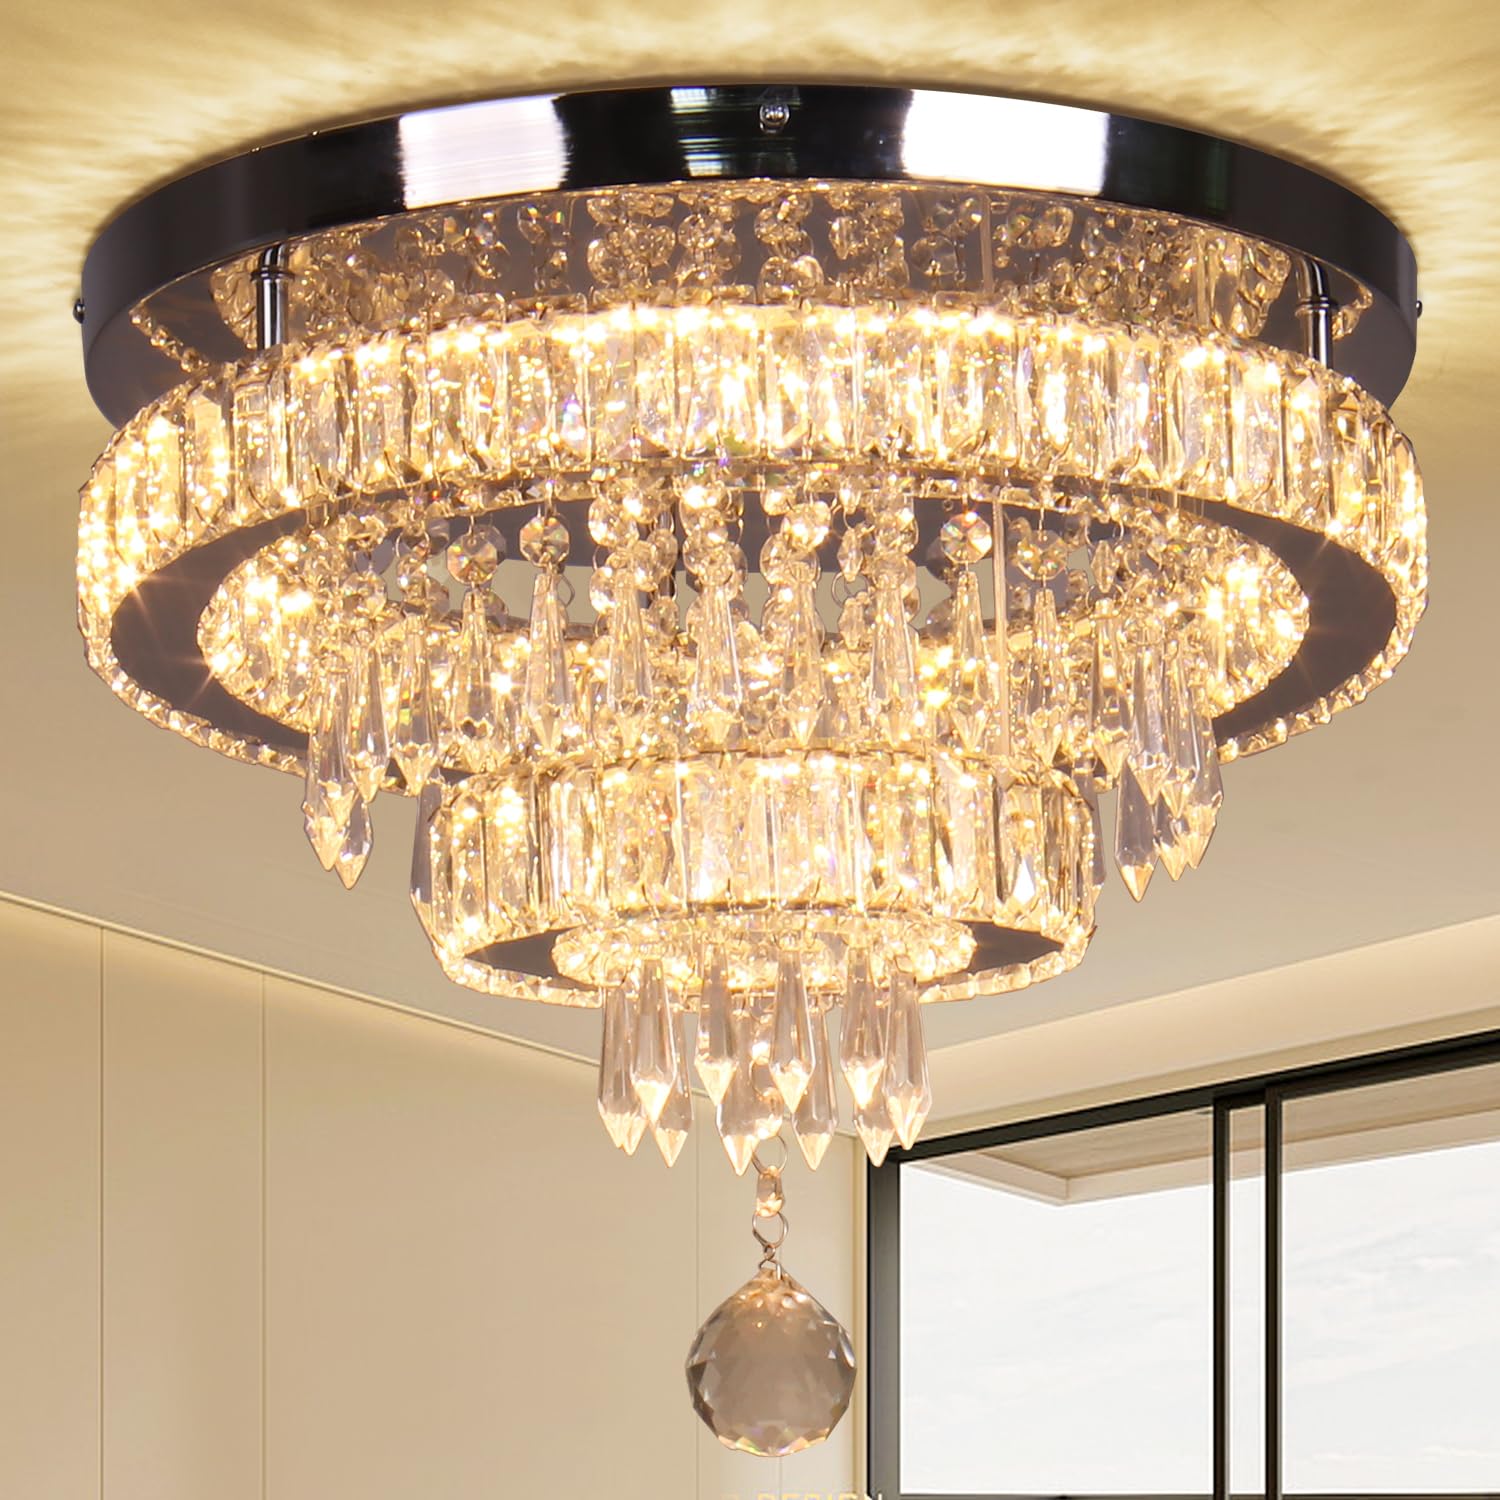 Crystal Chandelier 2 Rings Crystal Ceiling Light Fixture 15.7" Stainless Steel Semi-Flush Mount Ceiling Light Chandeliers for Bedrooms Living Room (Warm White)